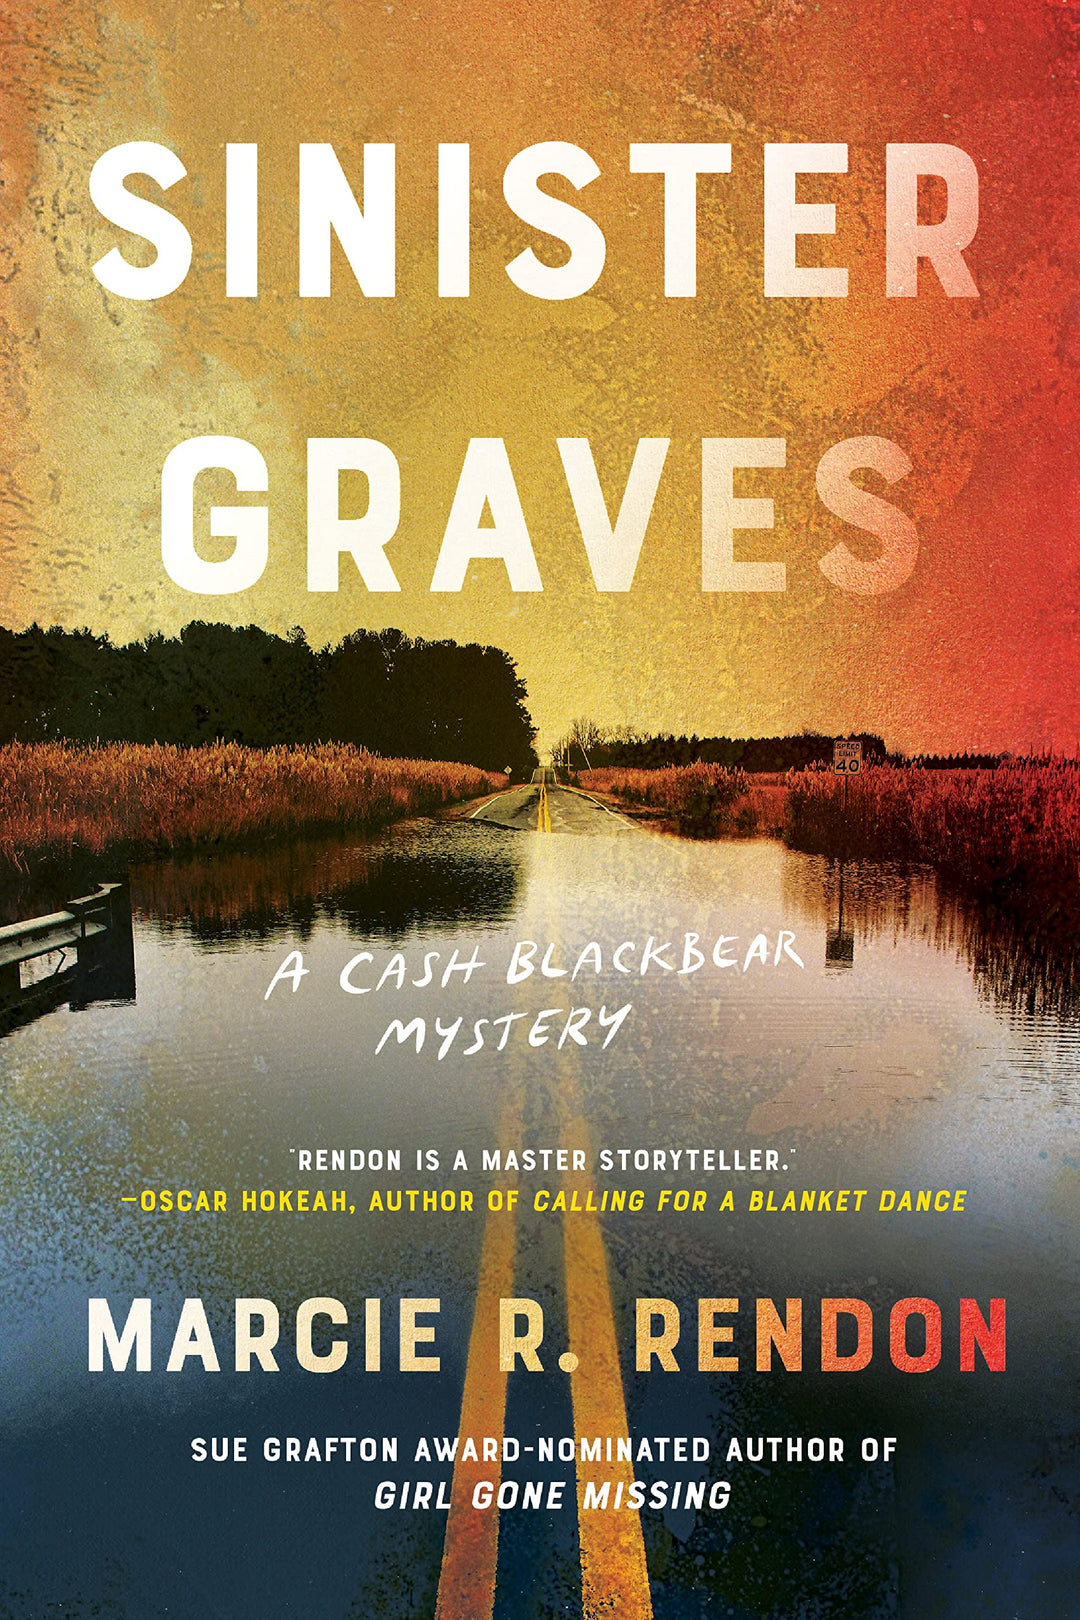 Sinister Grave by Marcie R. Rendon